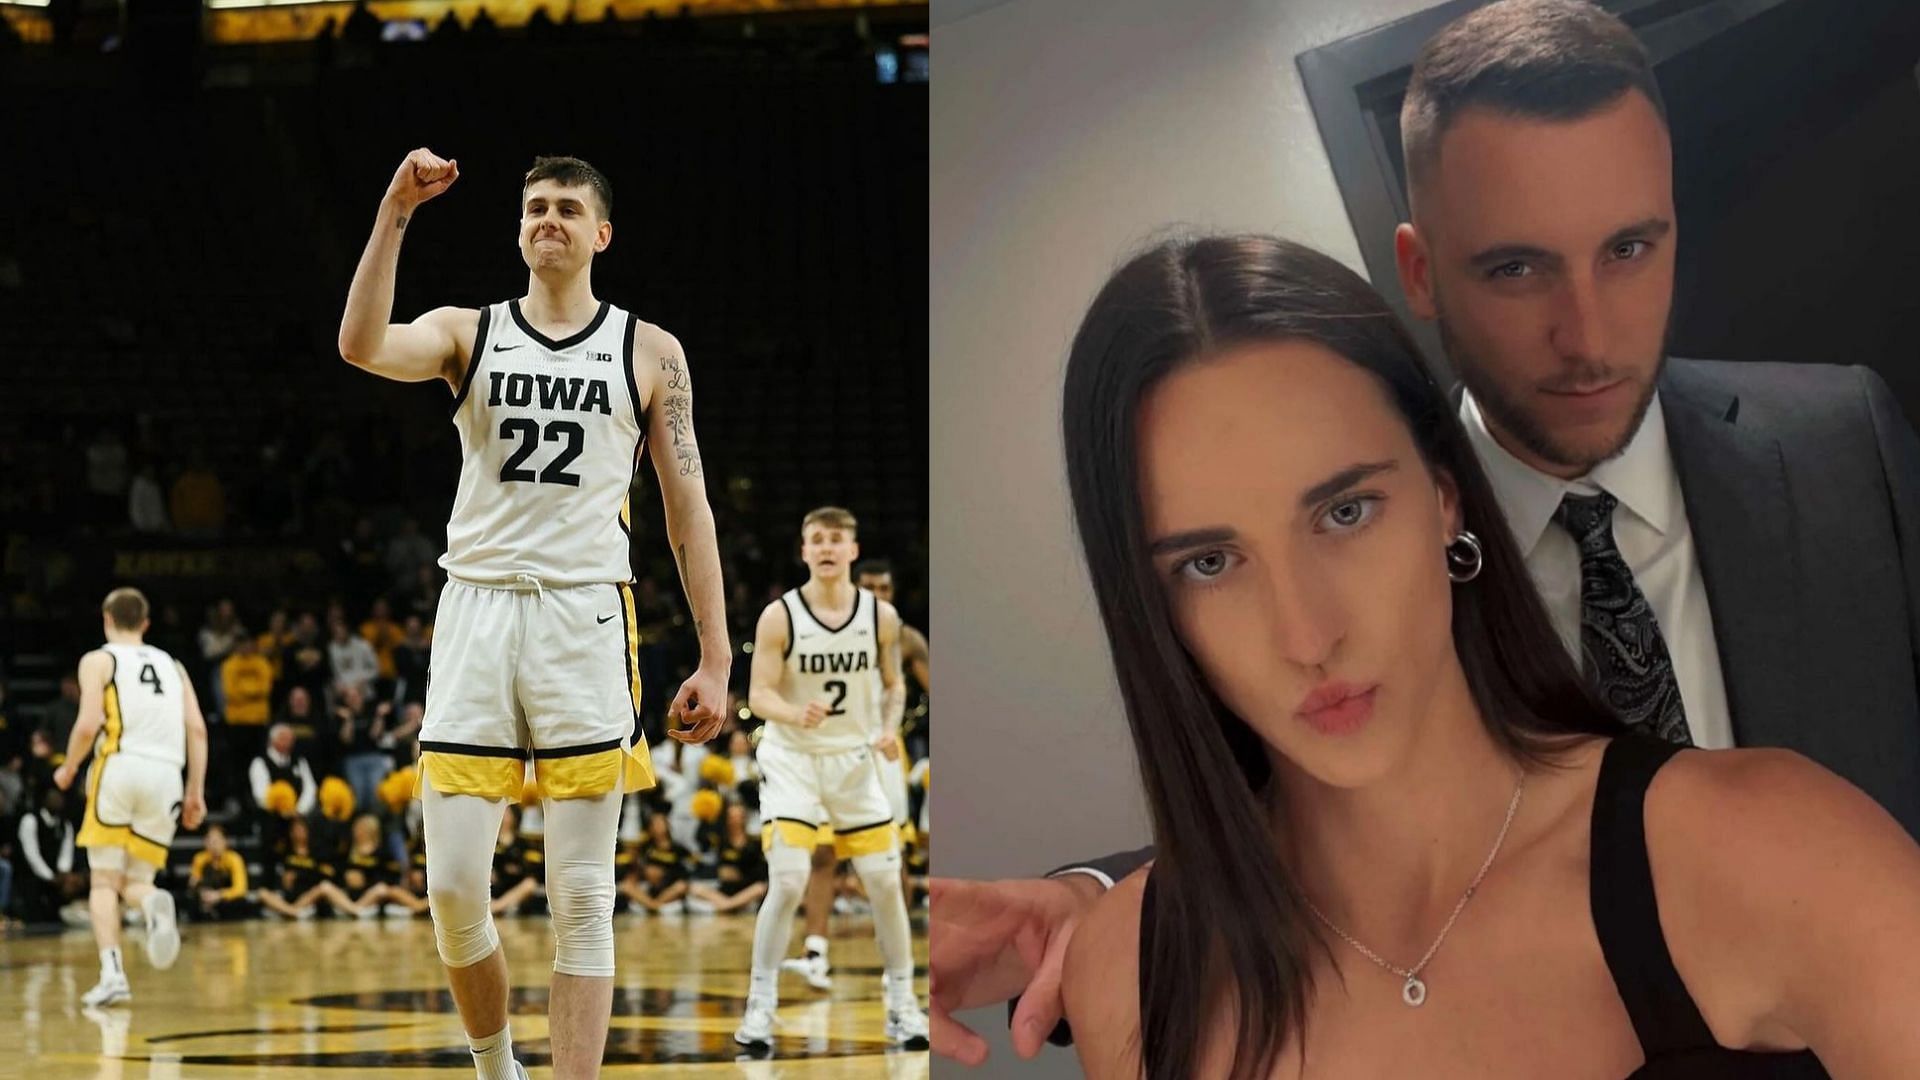 Iowa player Patrick McCaffery, his brother Connor and his girlfriend, Caitlin Clark 